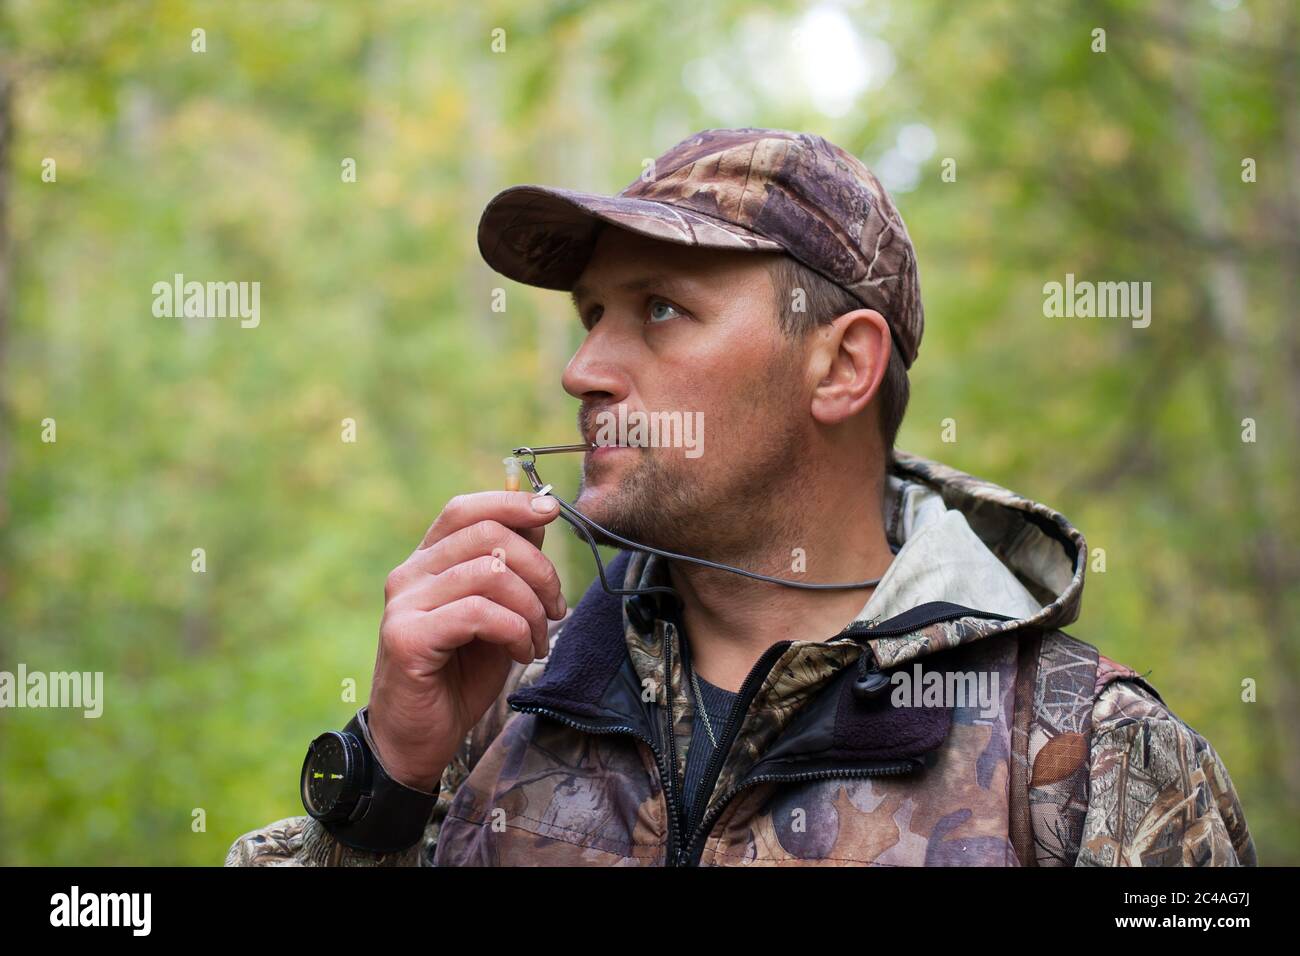 hunter with a grouse call Stock Photo